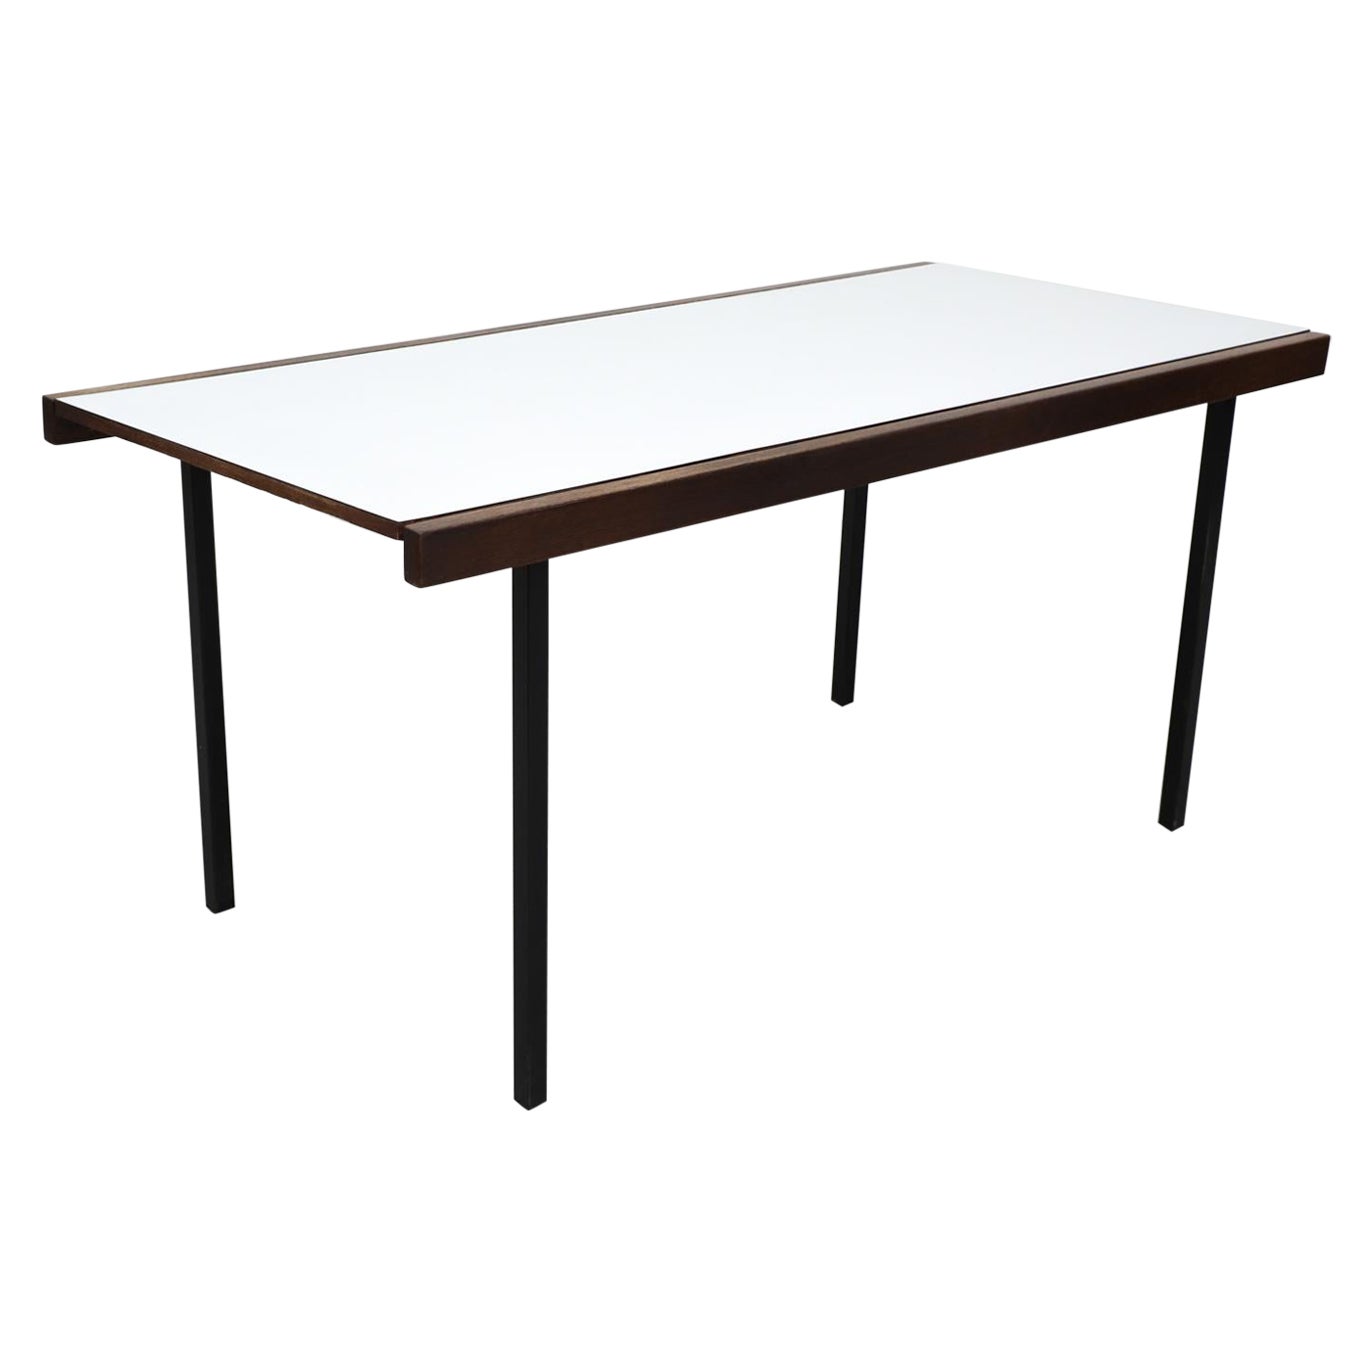 Martin Visser for 't Spectrum "TE21" or "Weert" Wenge Table with Formica top